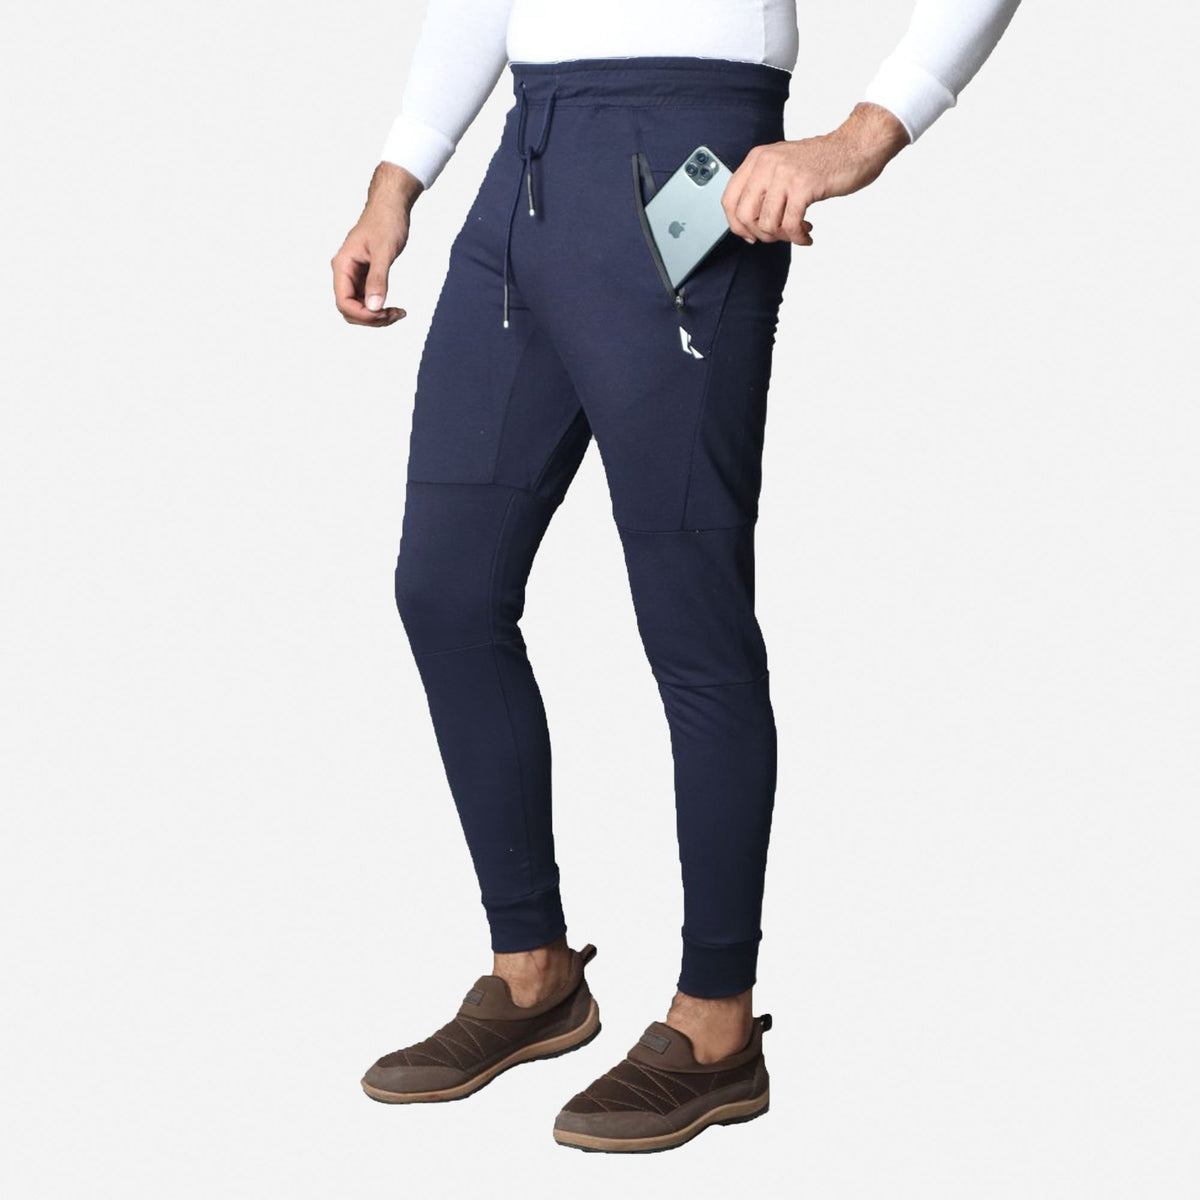 French Terry Trousers For Sports Casual Fitness Jogging - Navy Blue